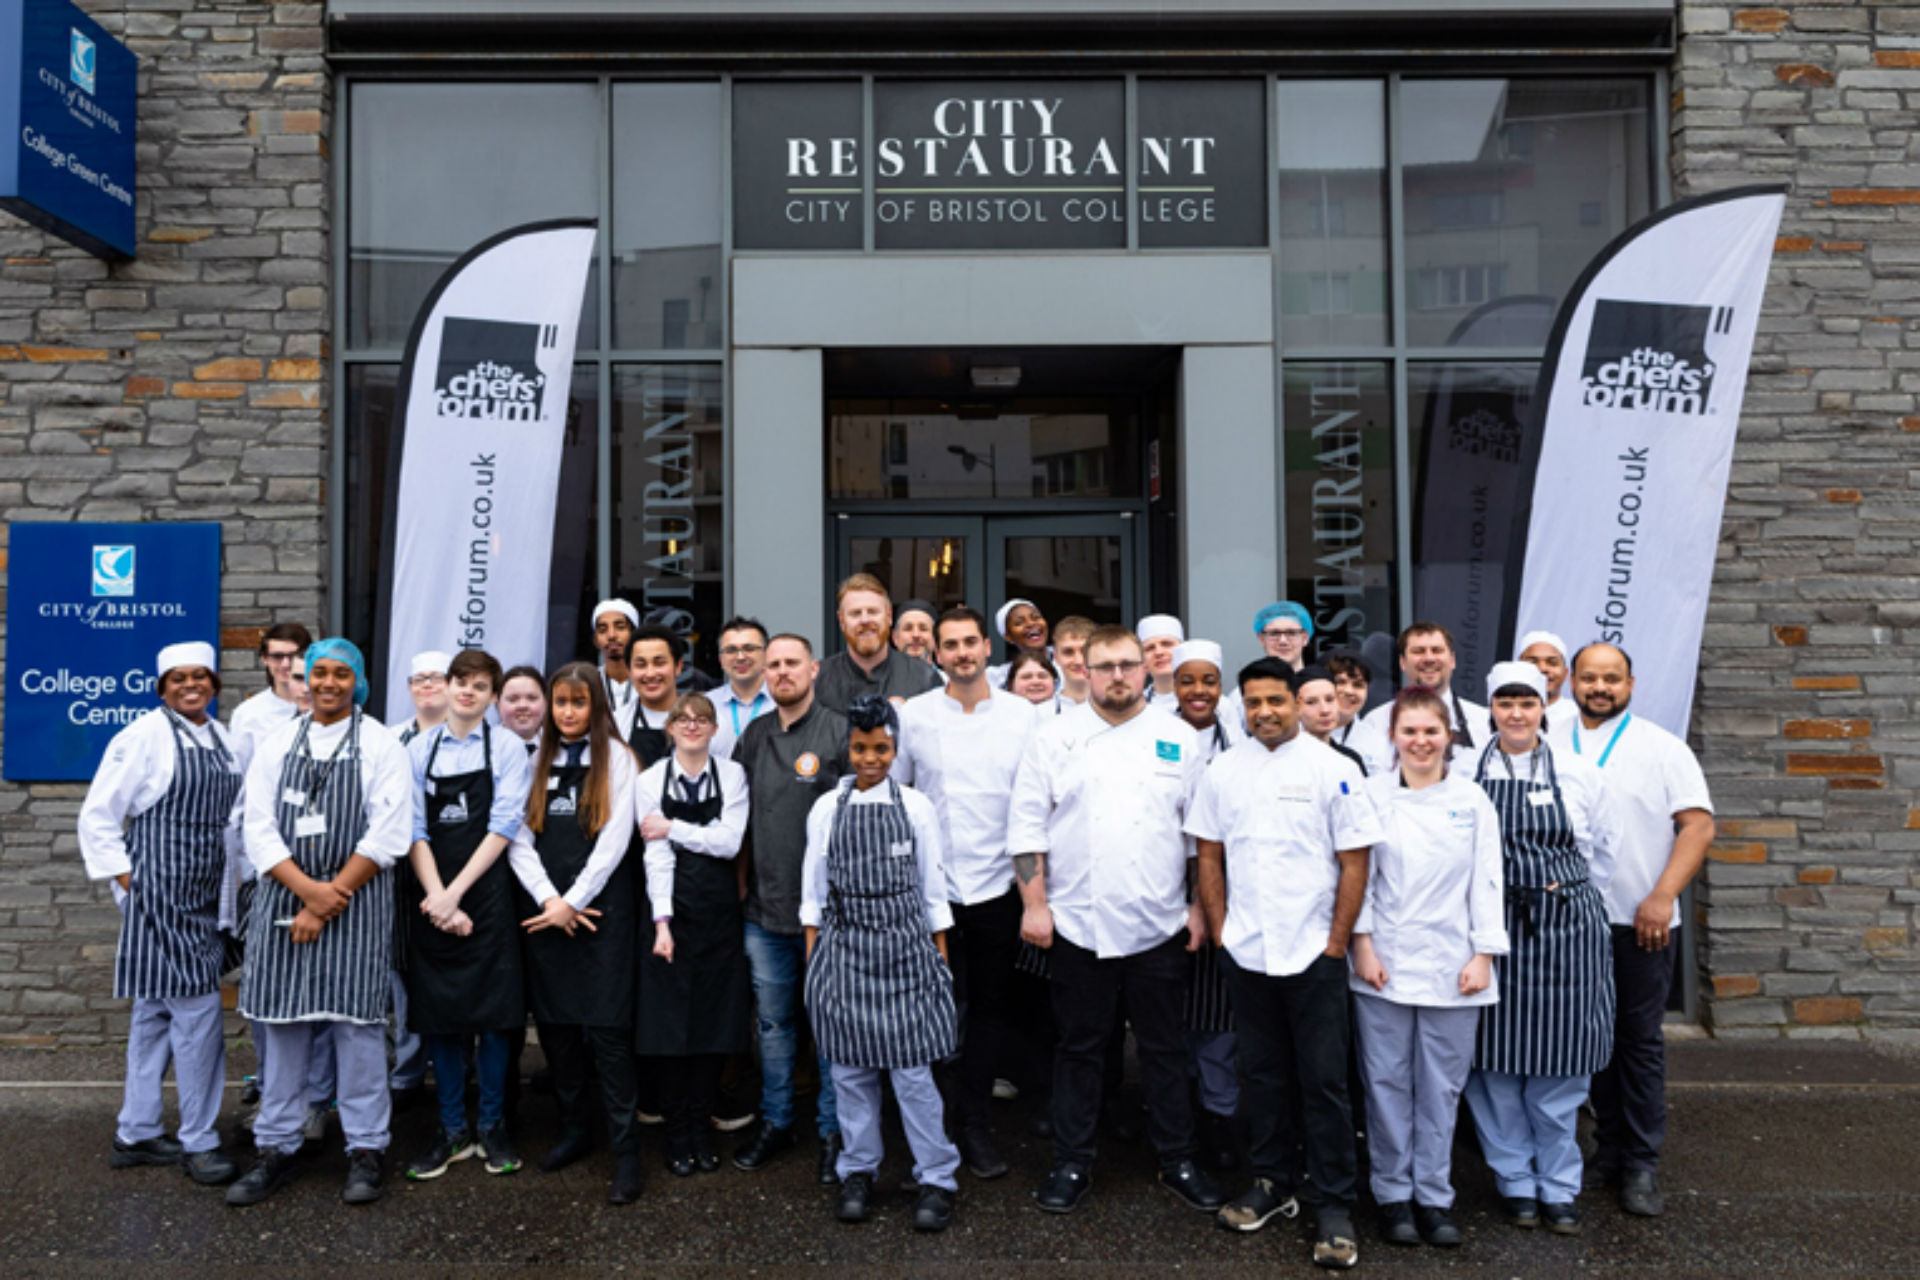 City of Bristol College students with chefs from Bristol and Weston-super-Mare